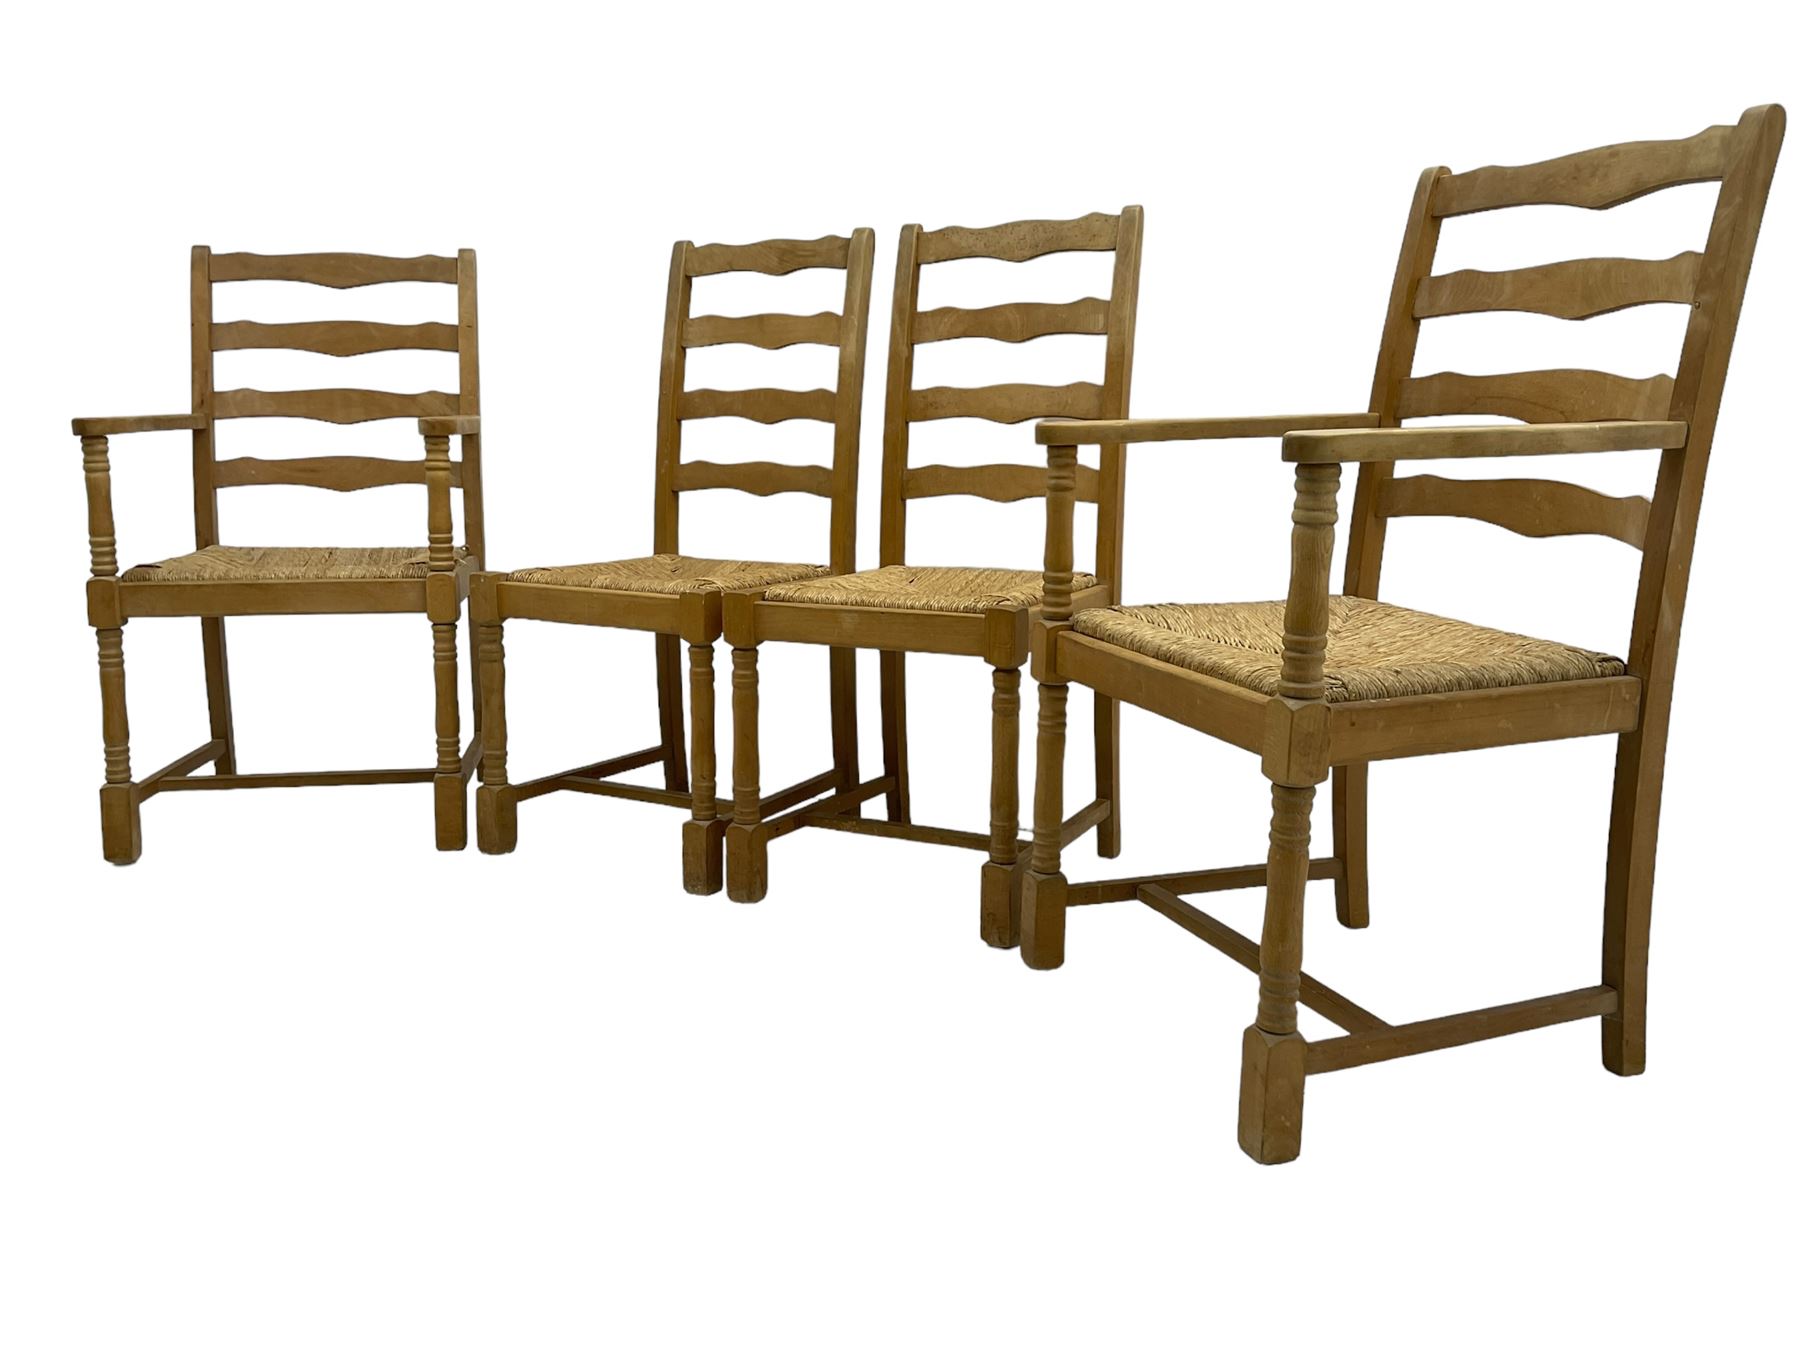 Set of six (4+2) beech dining chairs - Image 6 of 8